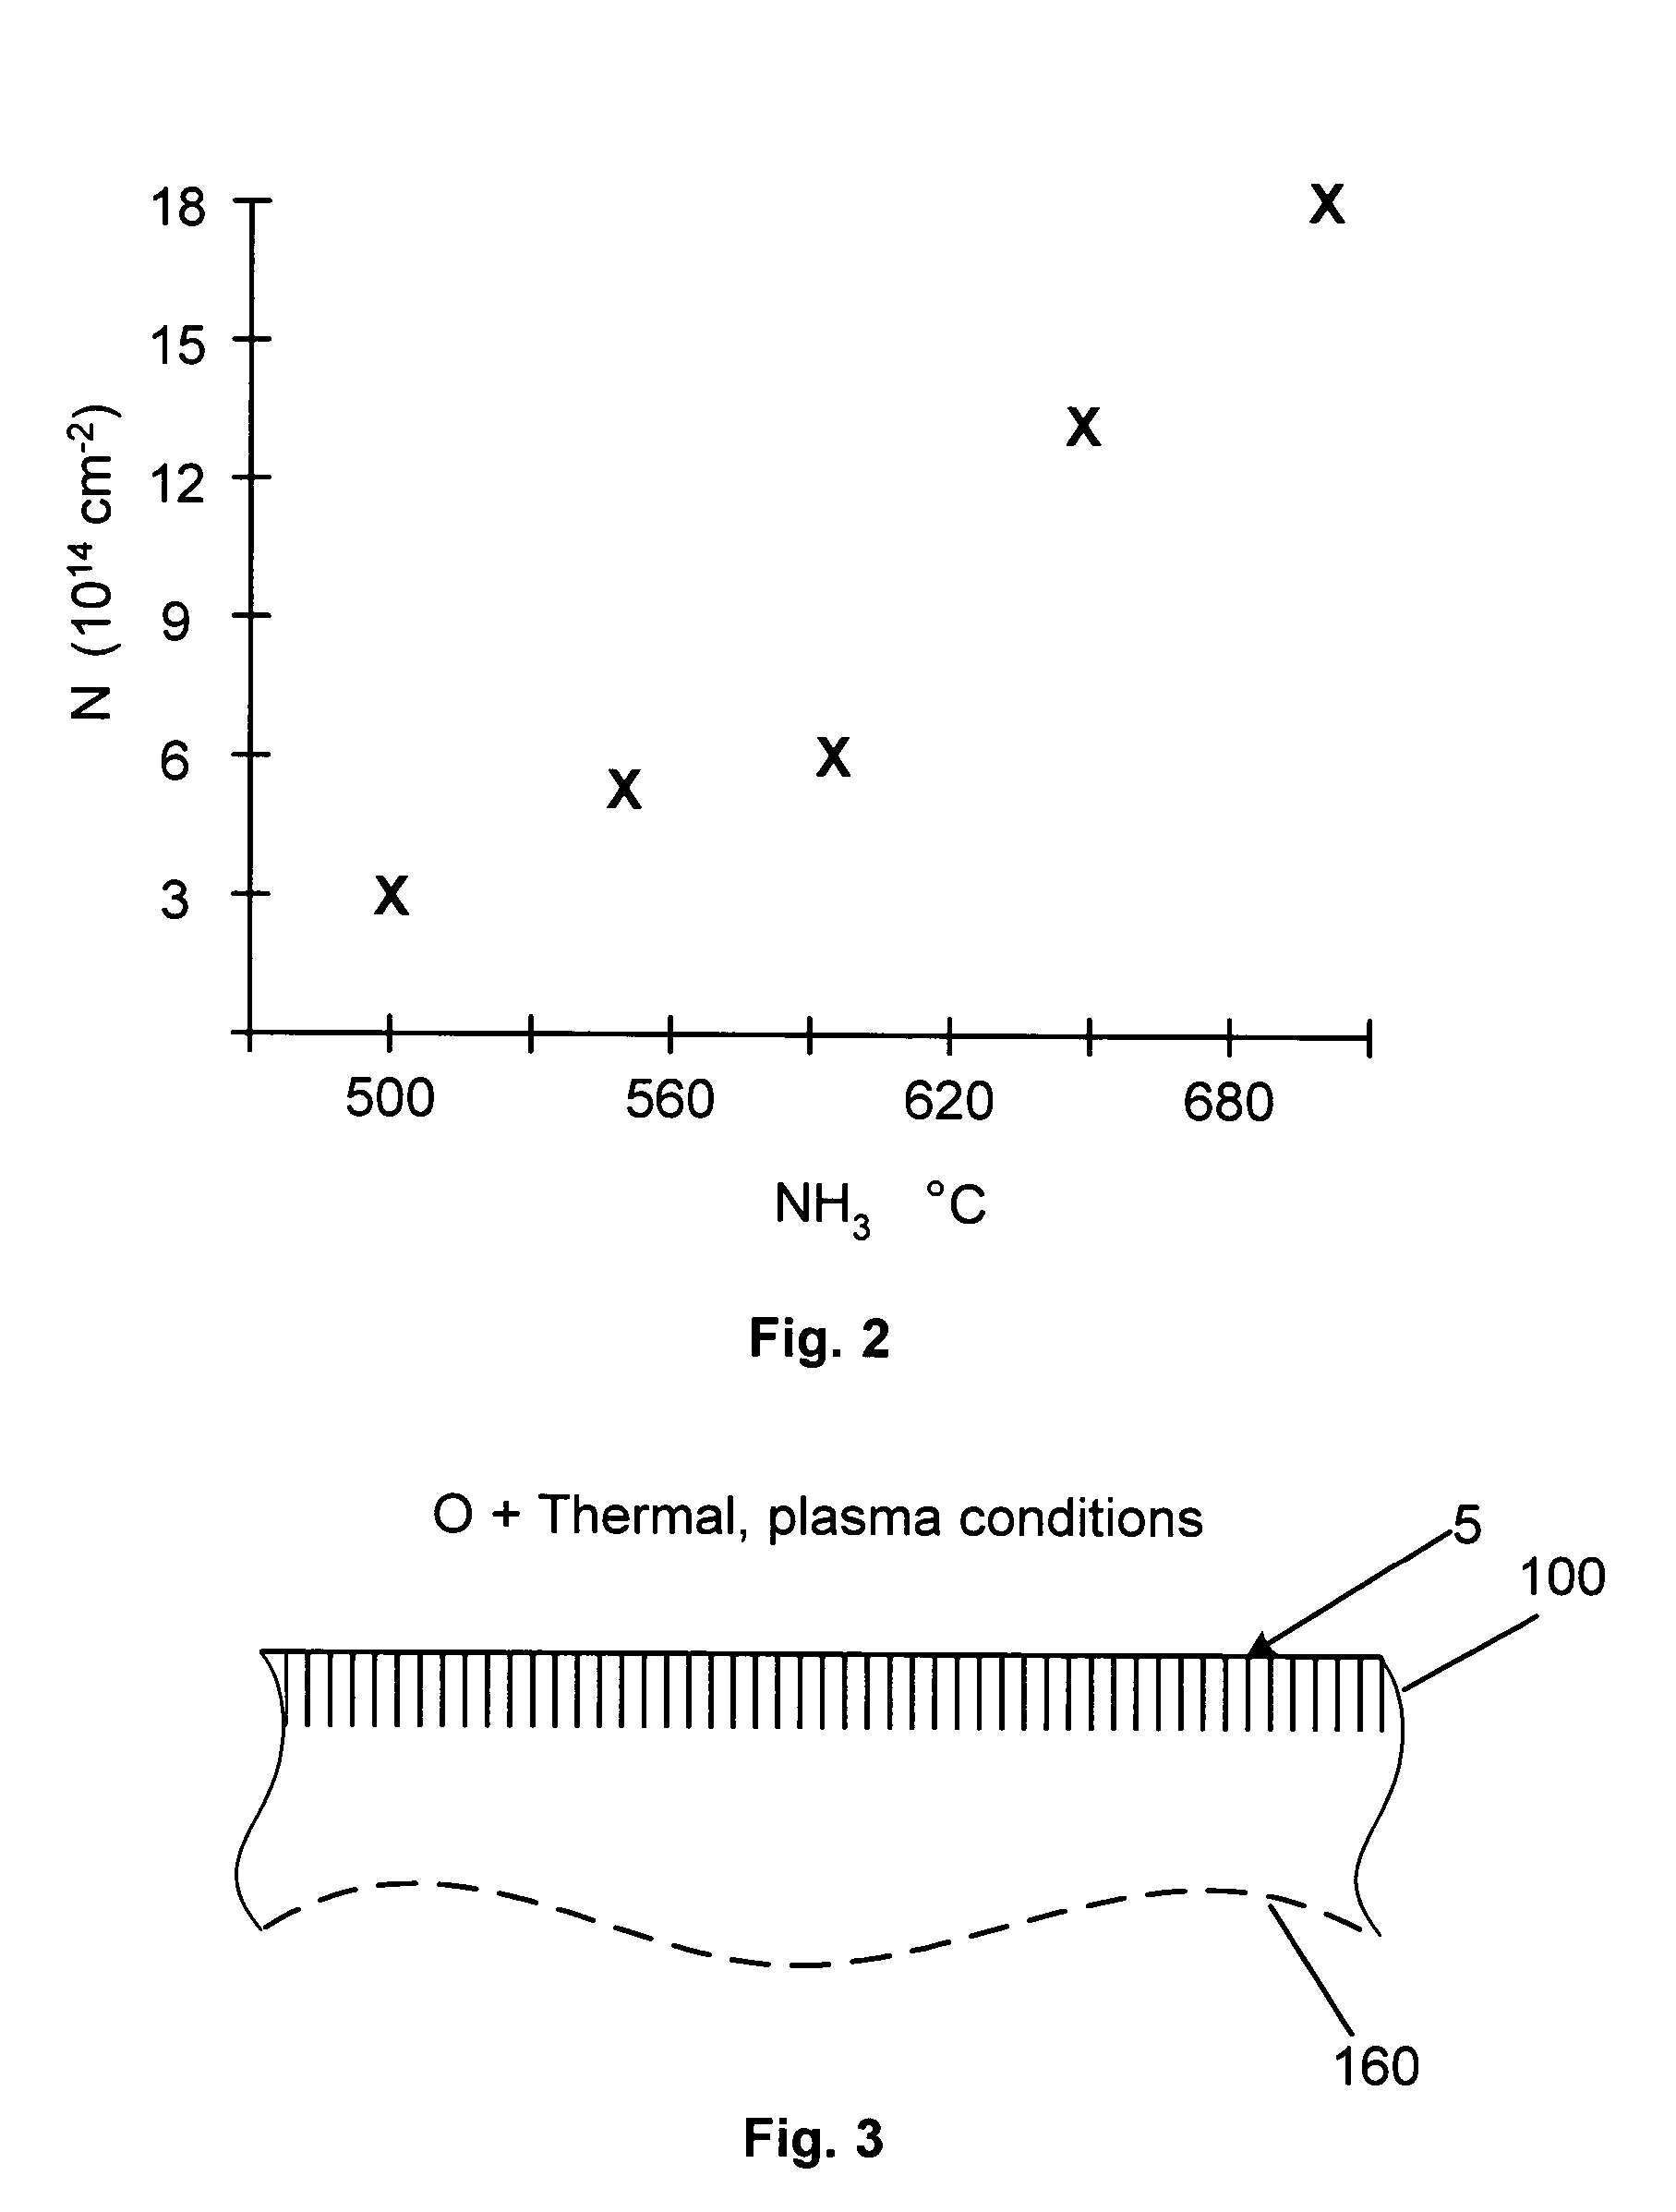 Thin germanium oxynitride gate dielectric for germanium-based devices